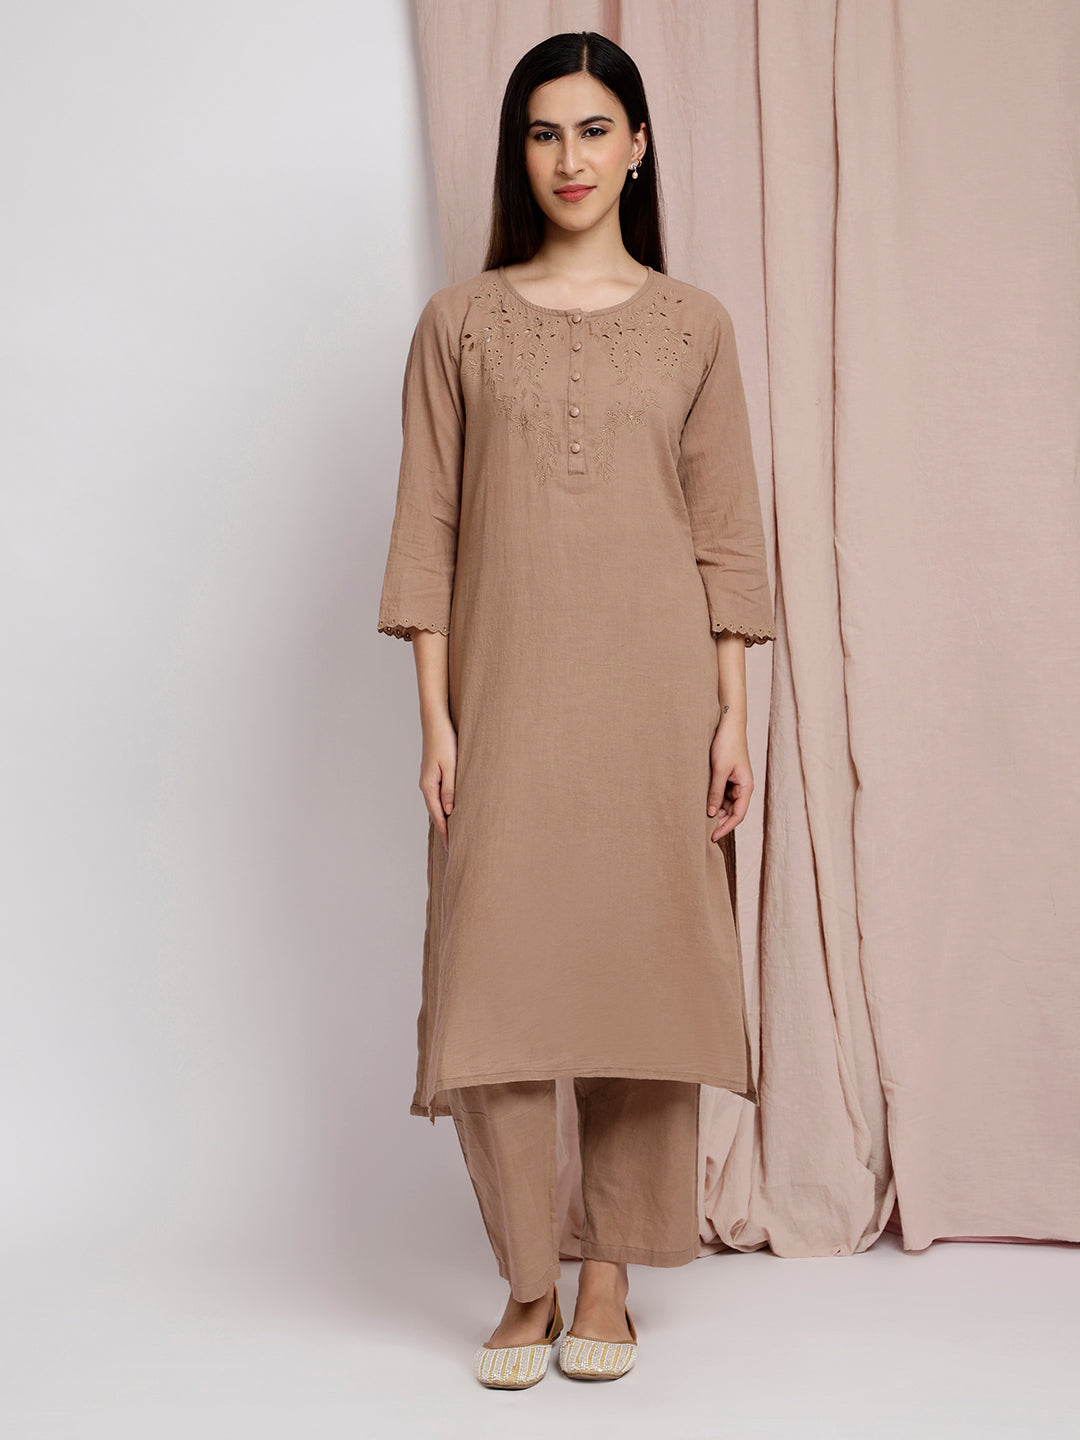 Chickoo Color Cotton Blend Mandarin Neck Embroidery Work |Kurti | Party  wear indian dresses, Kurti, Lehenga collection